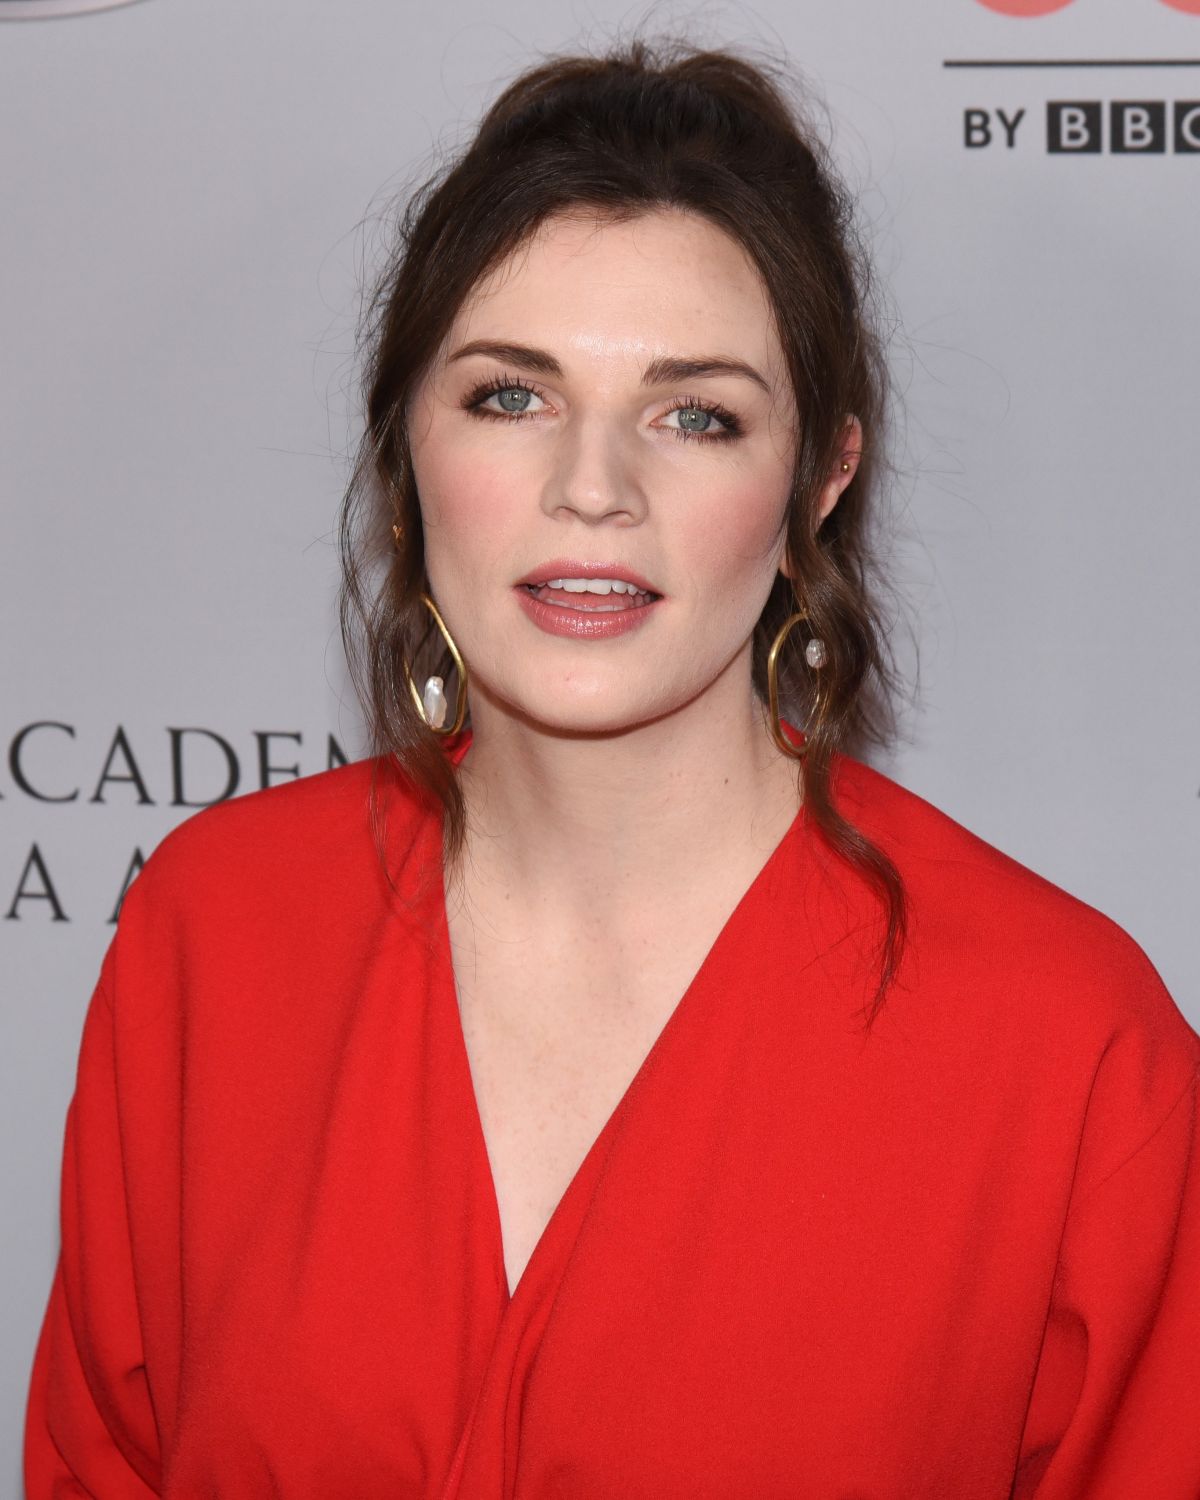 AISLING BEA at 2019 British Academy Britannia Awards in Beverly Hills ...